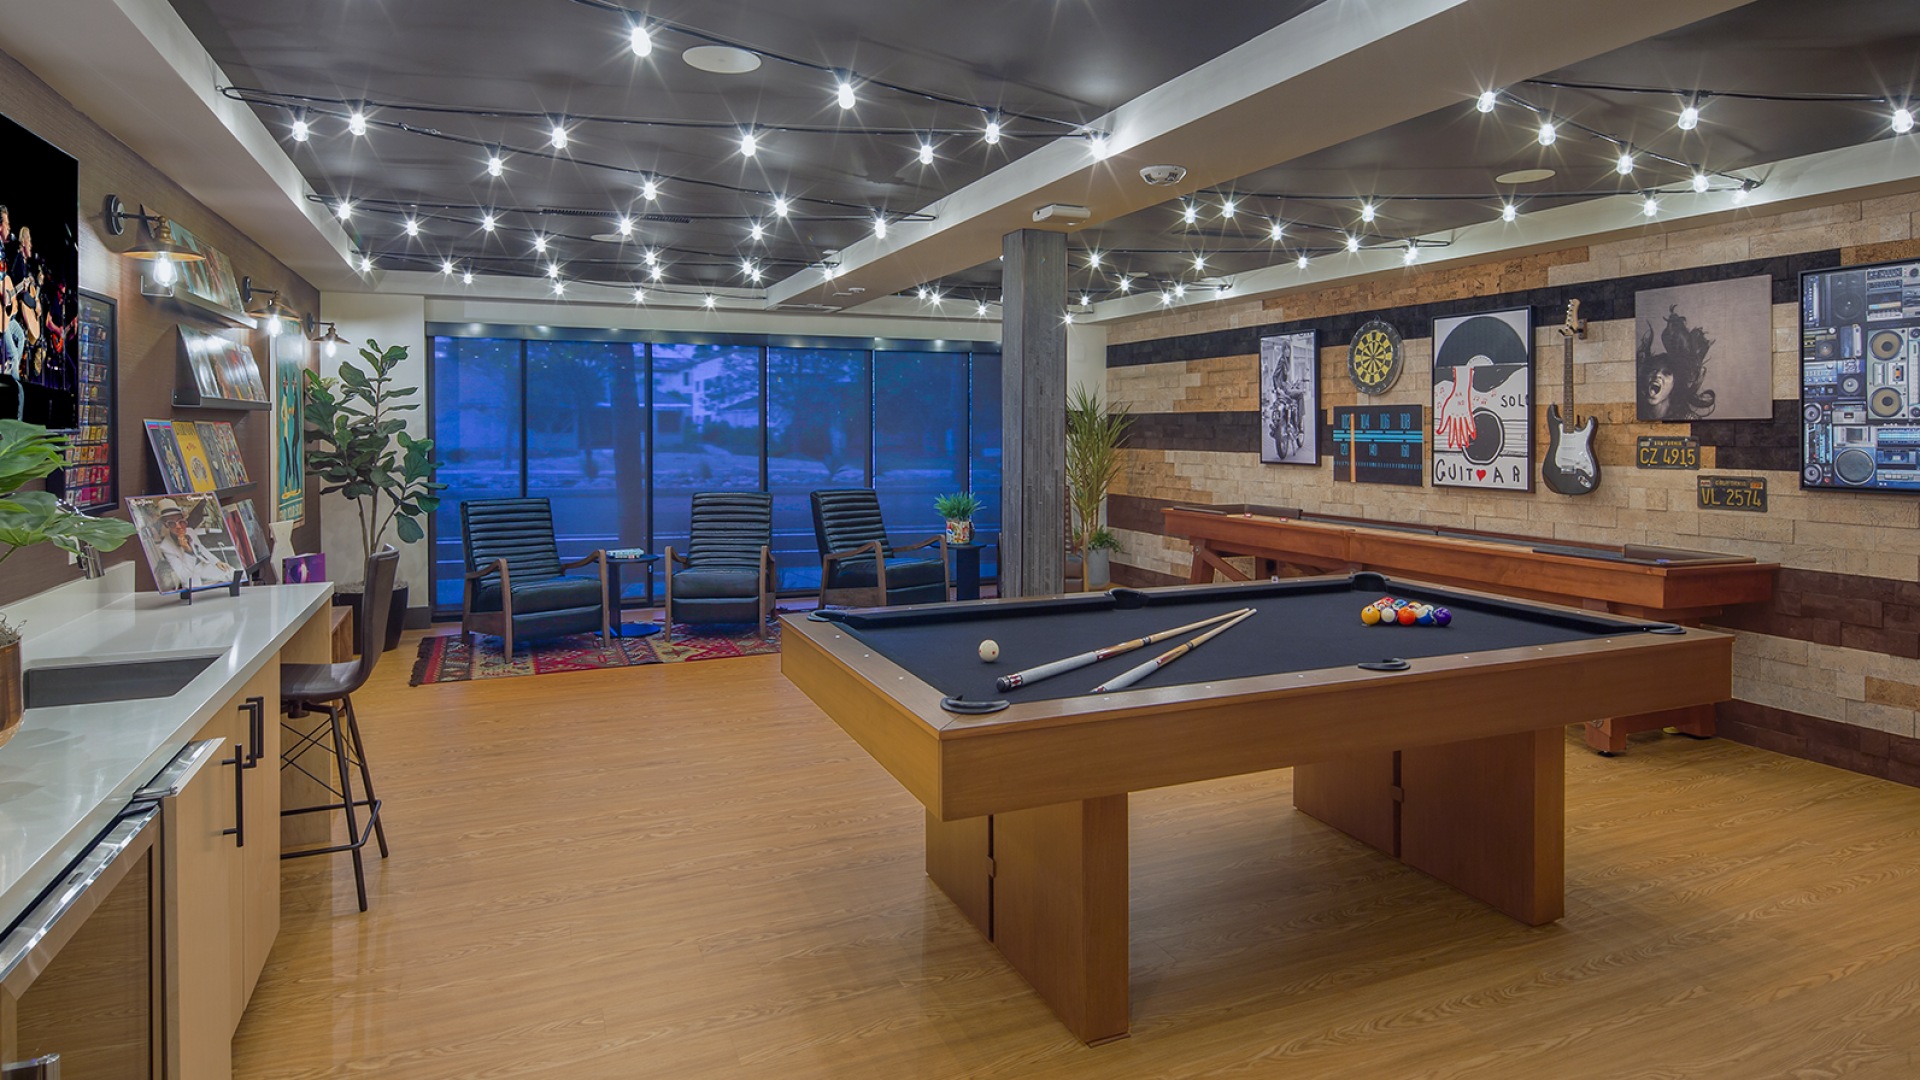 Entertainment lounge with pool and shuffleboard